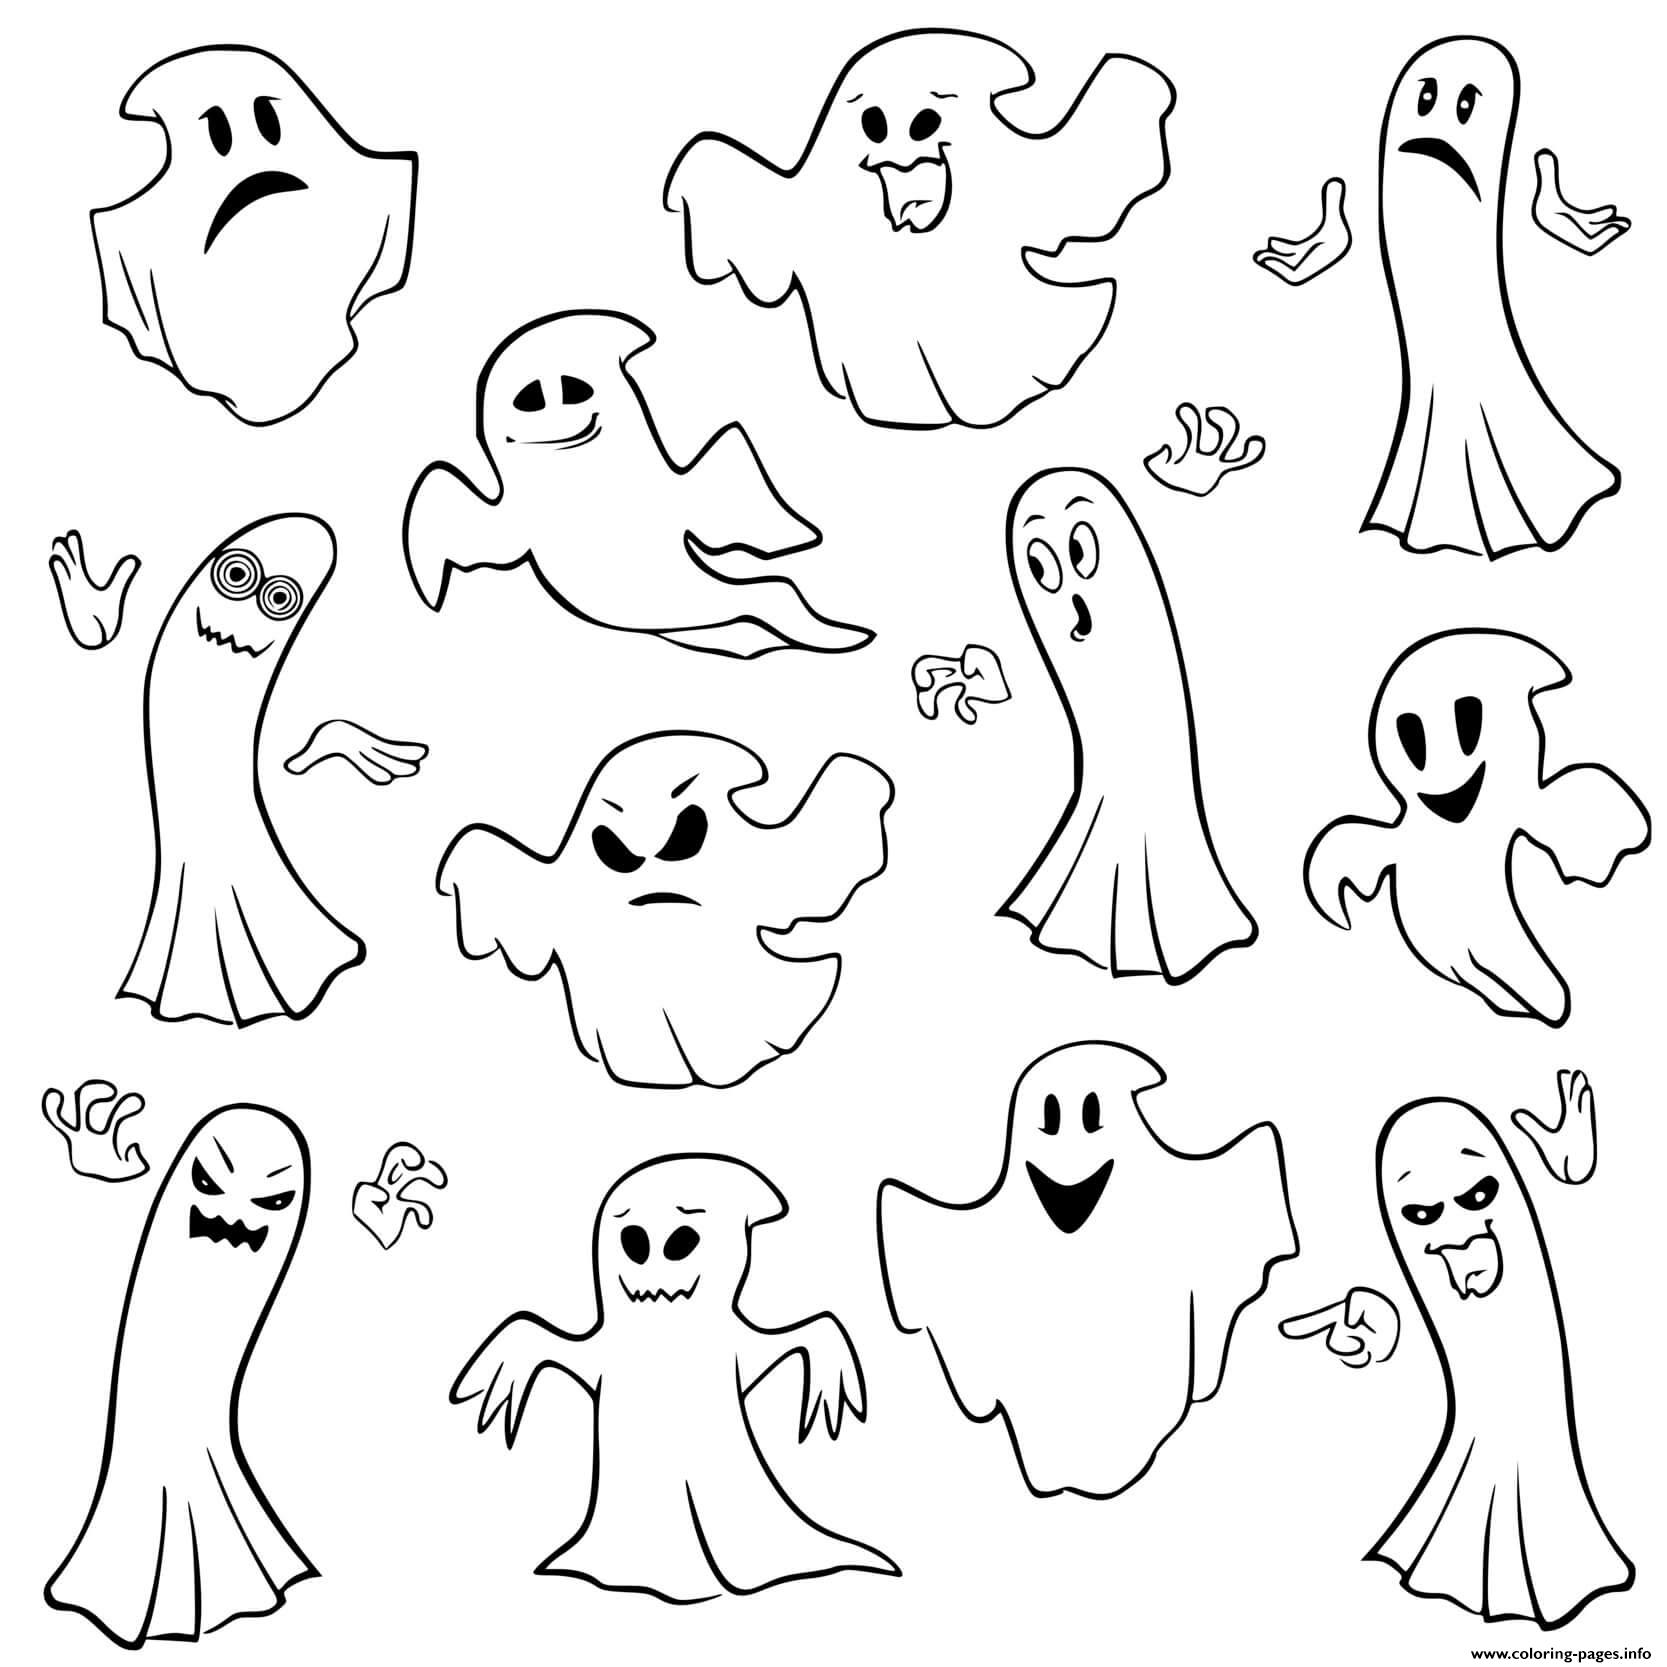 A Lot Of Ghosts For Halloween coloring